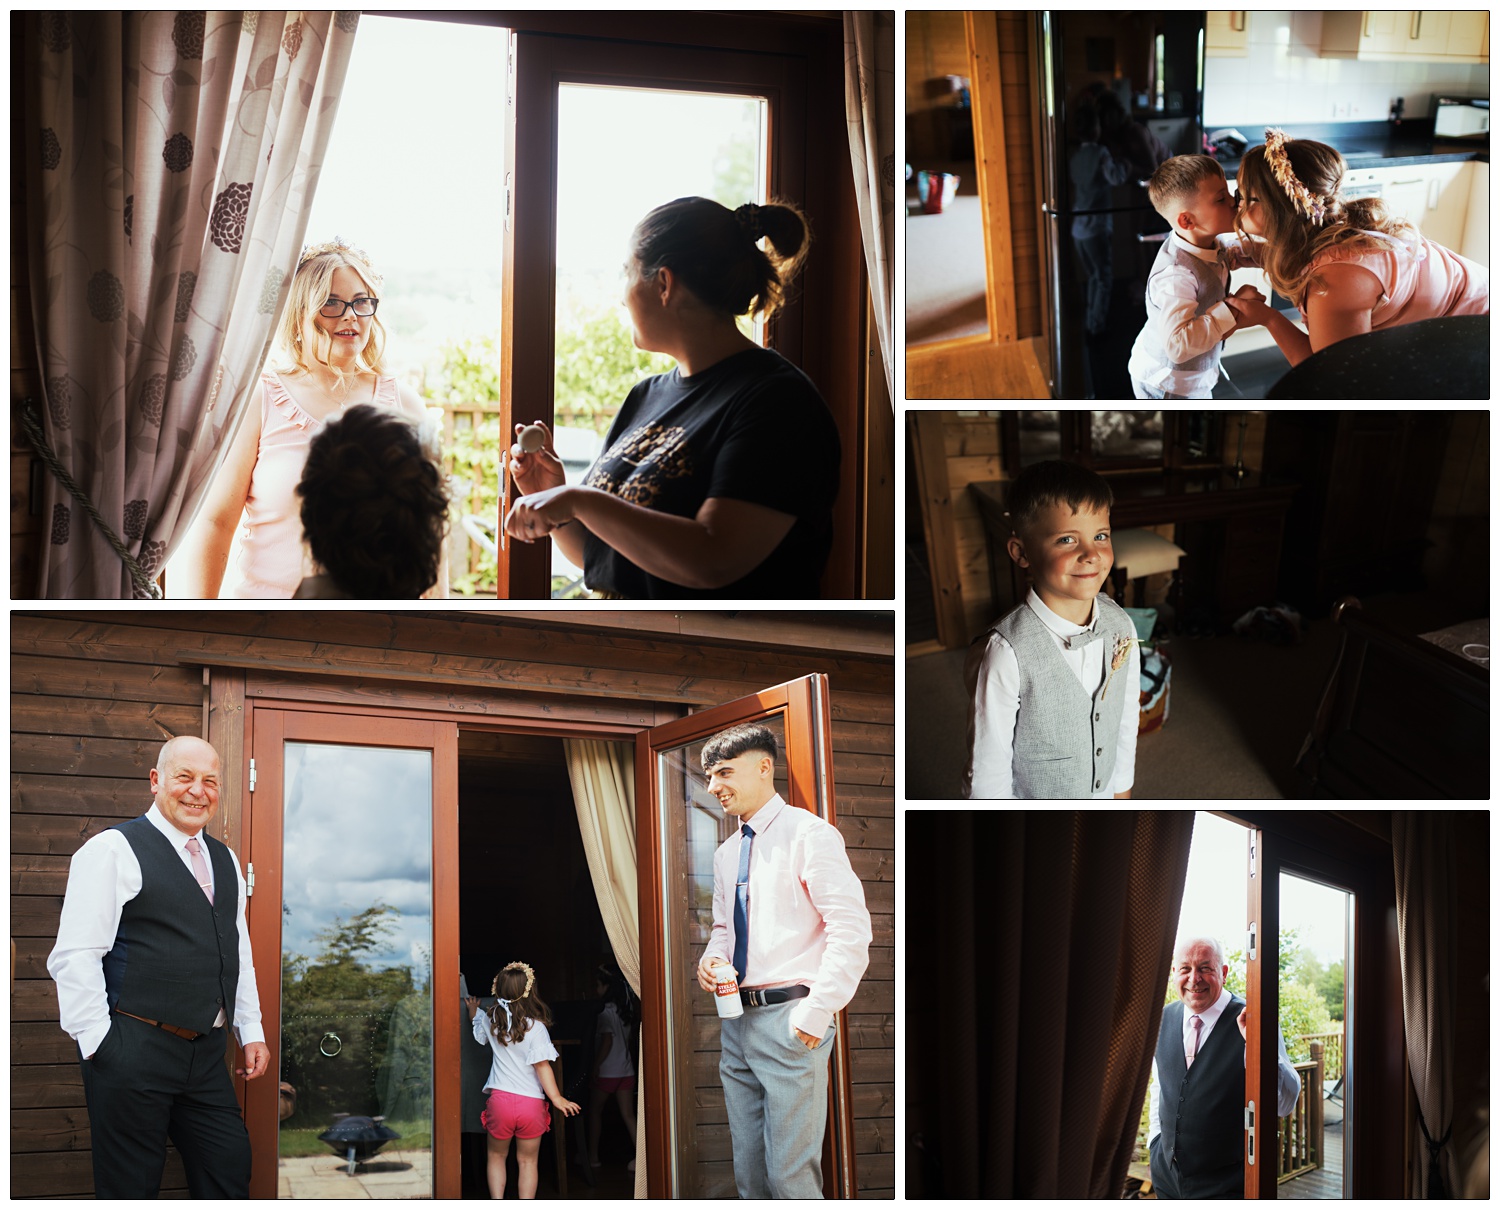 Moment from the morning of a wedding. The family are getting ready in the holiday lodges at Fynn Valley.